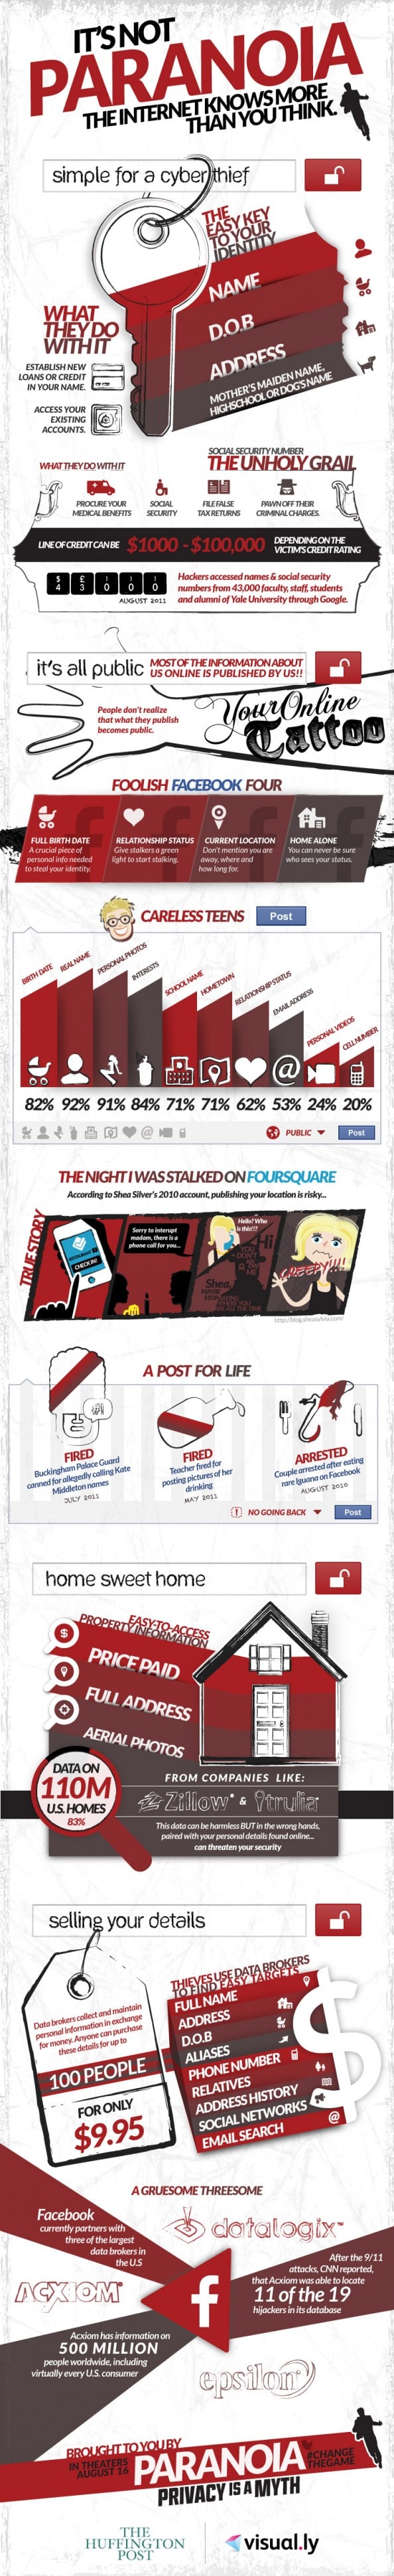 Is It Privacy Paranoia Or Does The Internet Know It All? [Infographic]